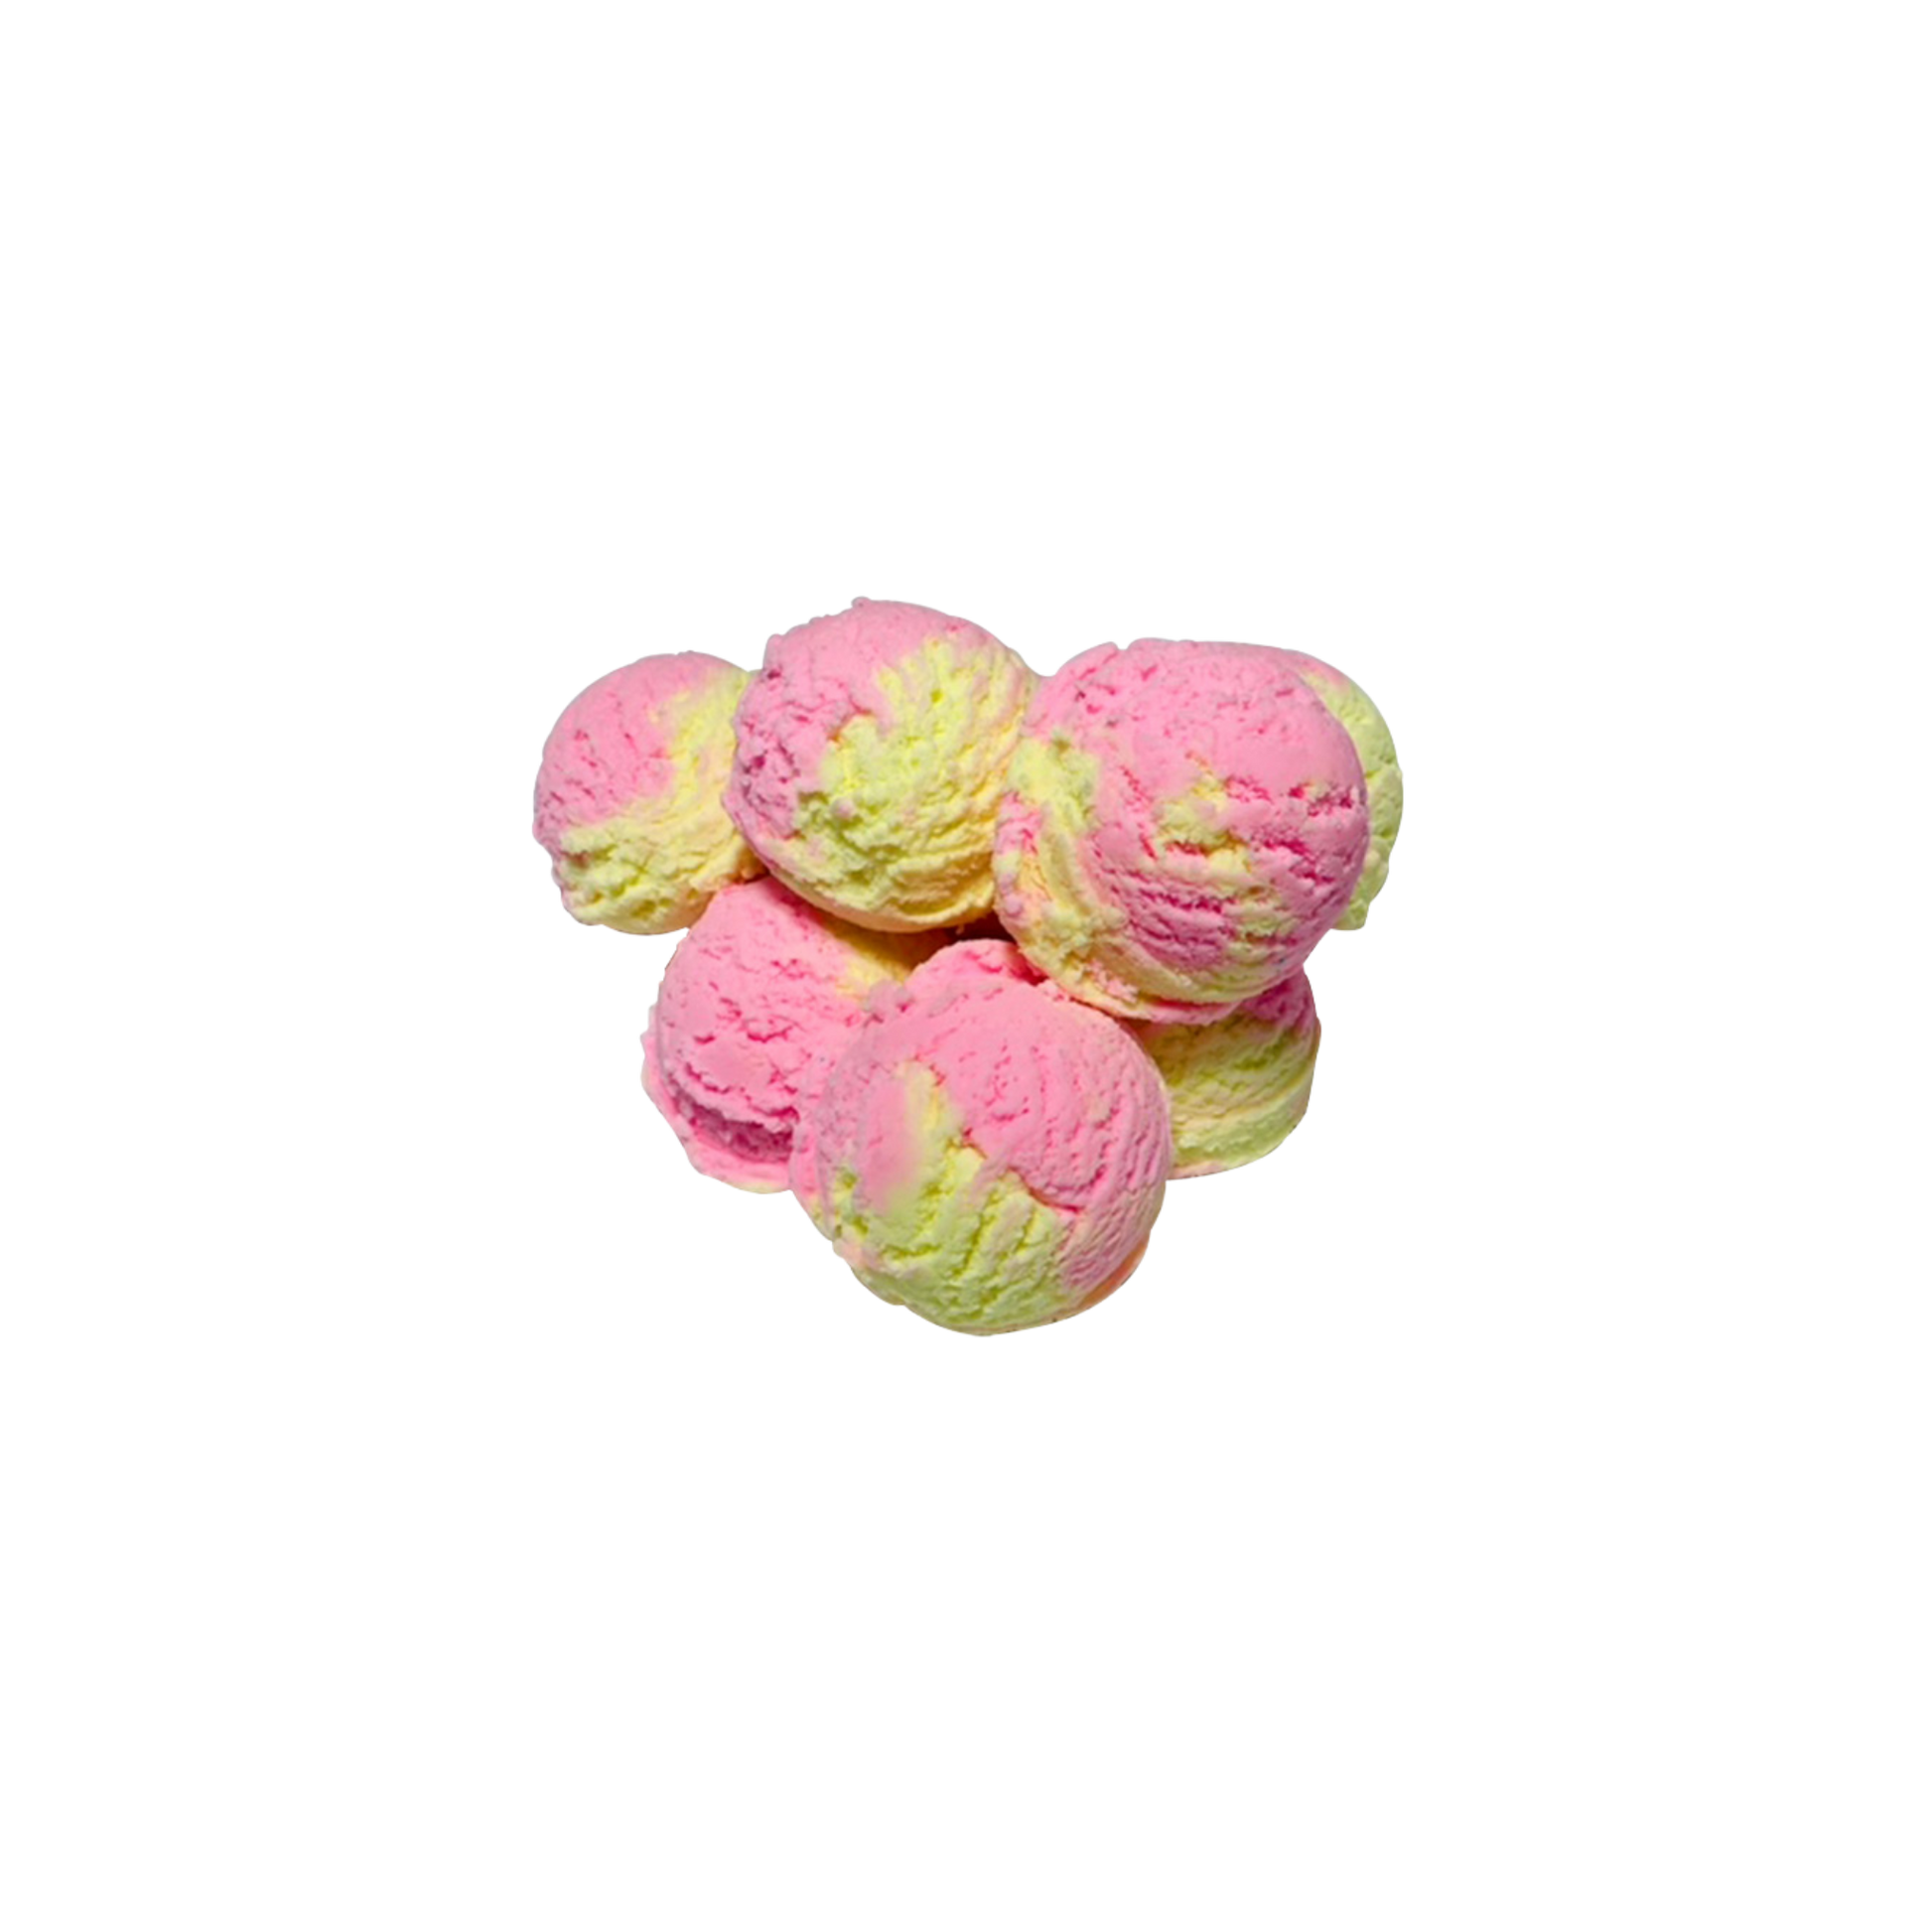 Raspberry Lemonade Bubble Scoop bath bomb made natural wholesale handmade bath products private label made in usa.png